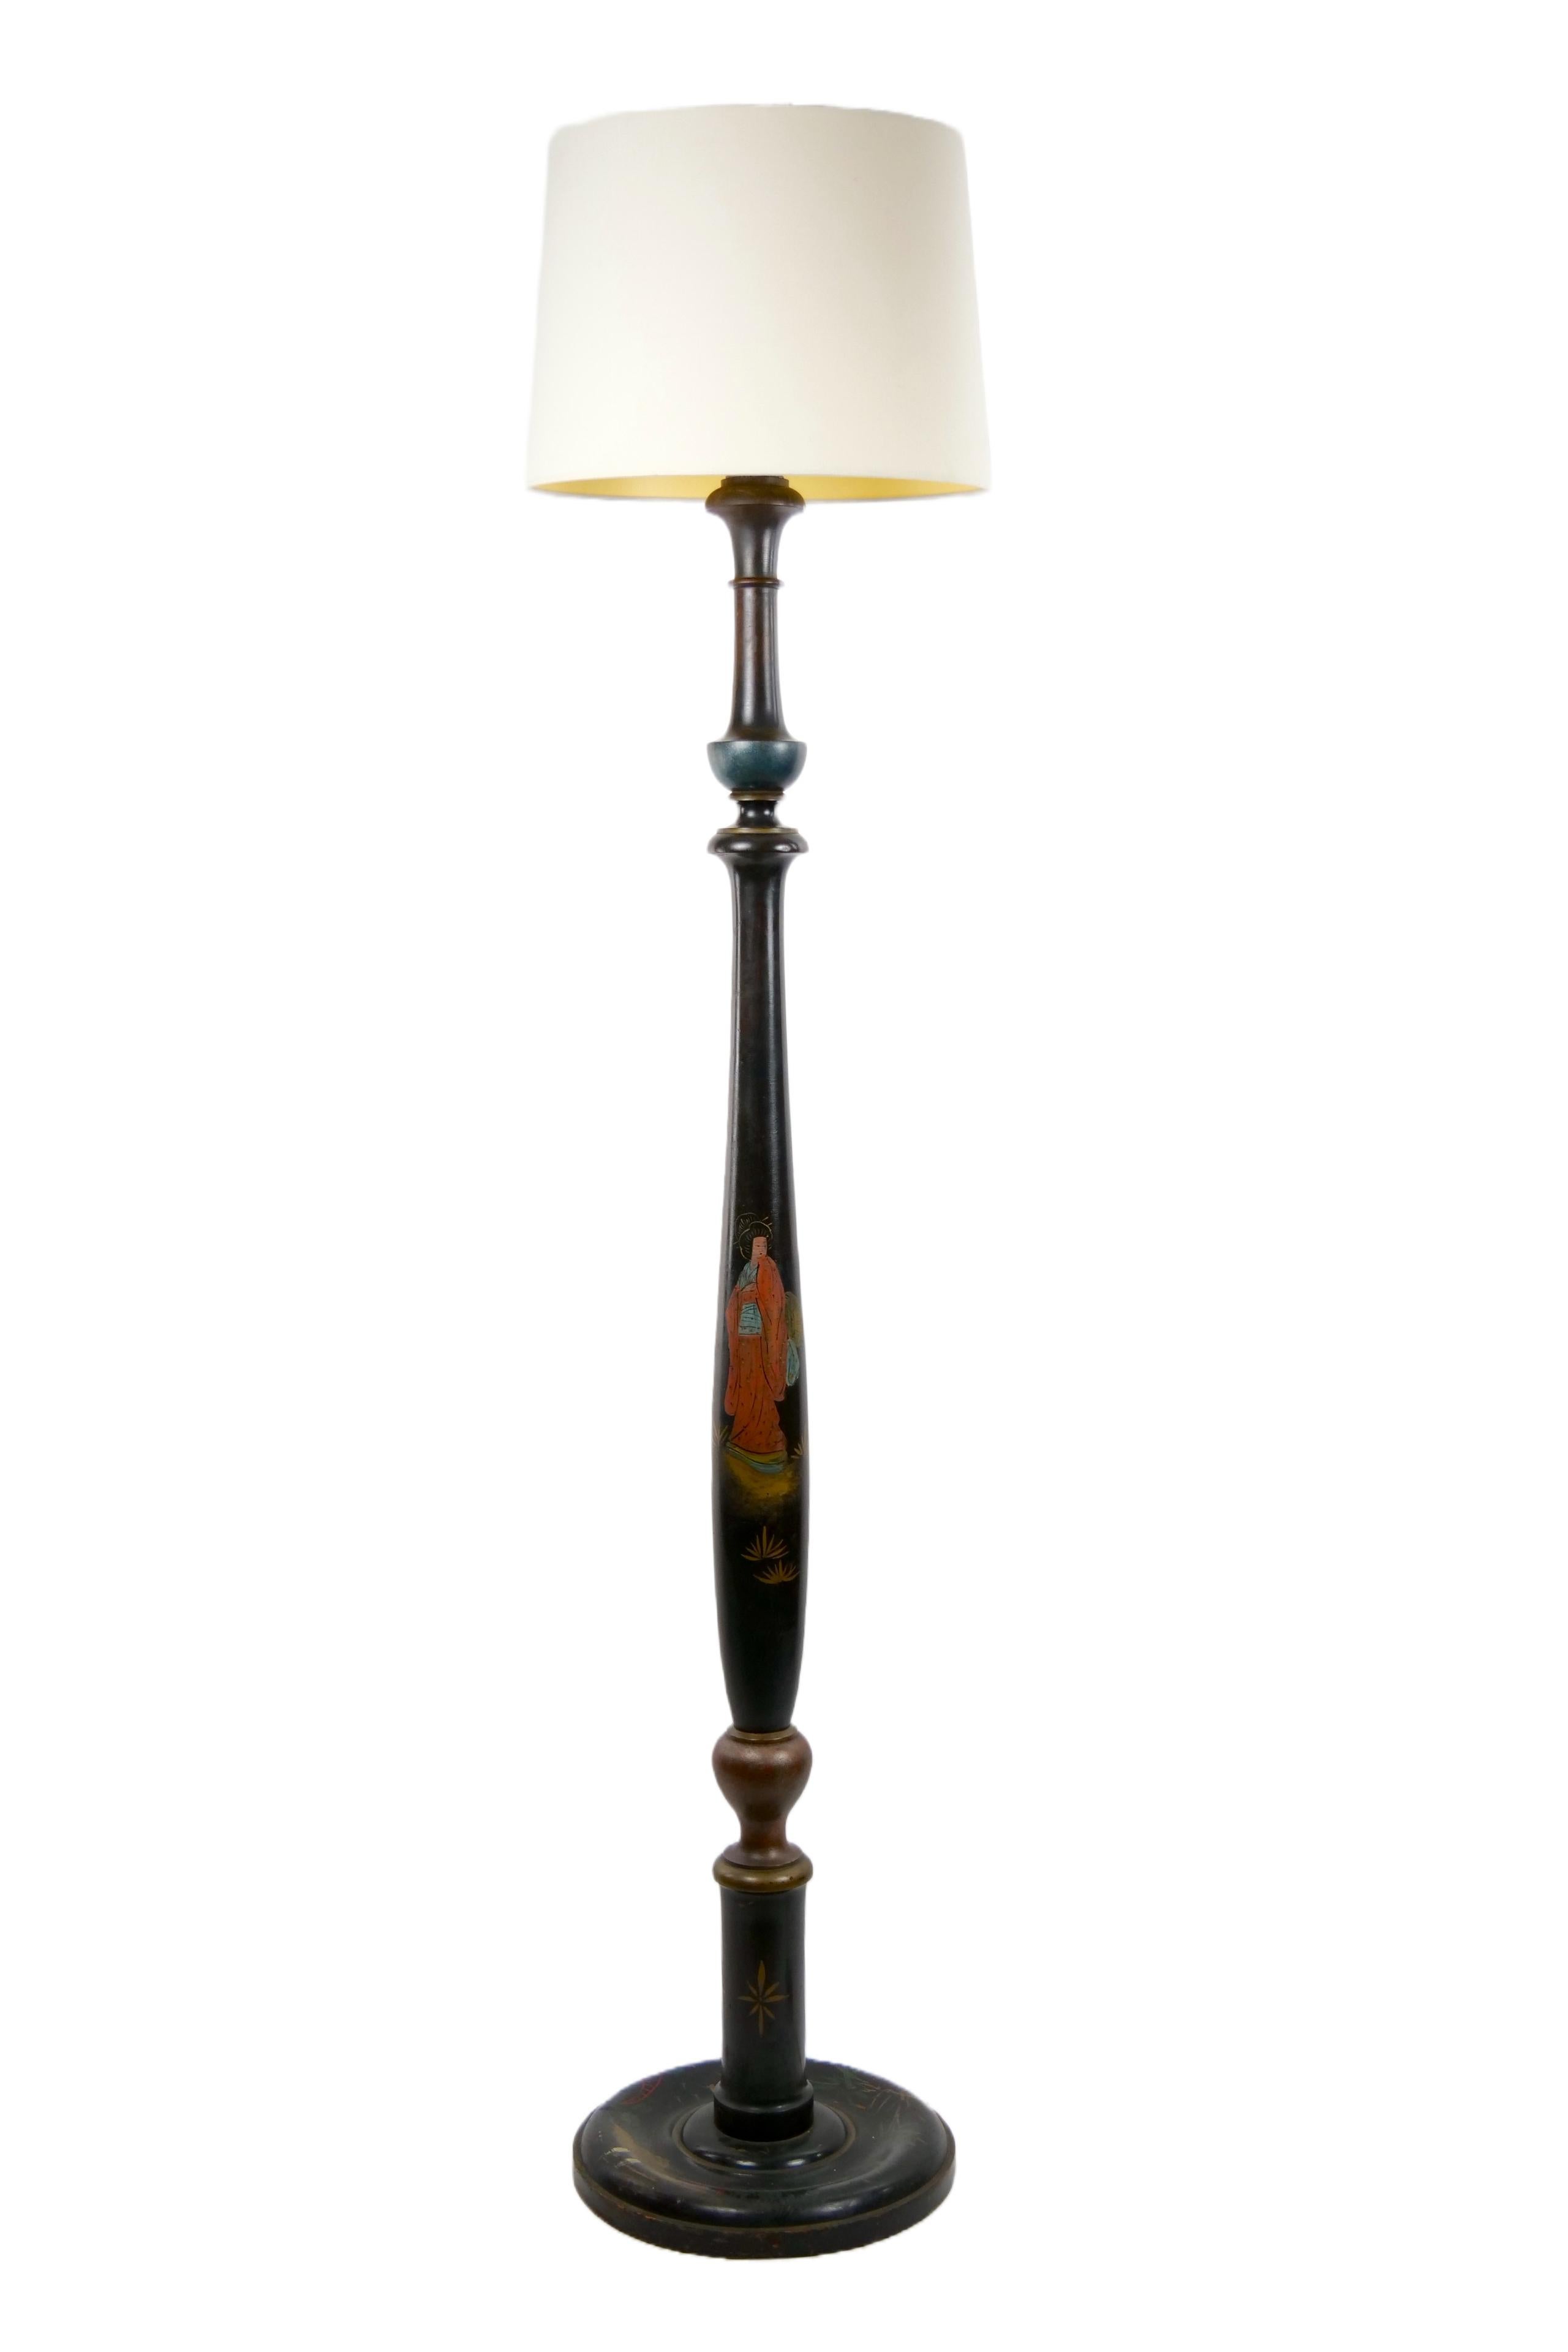 Antique Japonisme / Chinoiserie Hand-Painted Wooden Floor Lamp For Sale 6